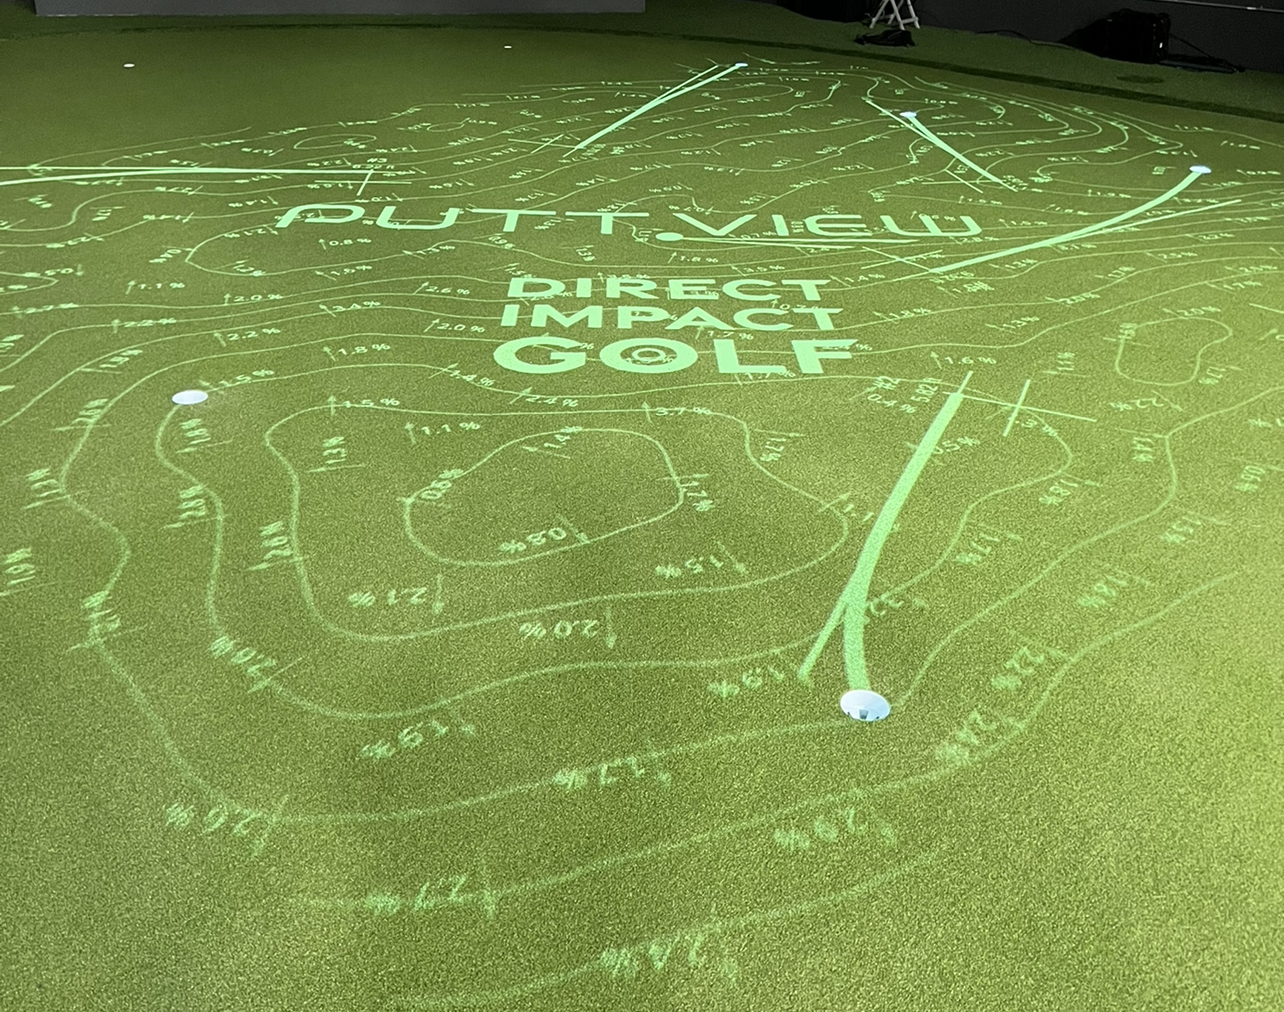 Largest PuttView in Texas and the only public use PuttView in DFW